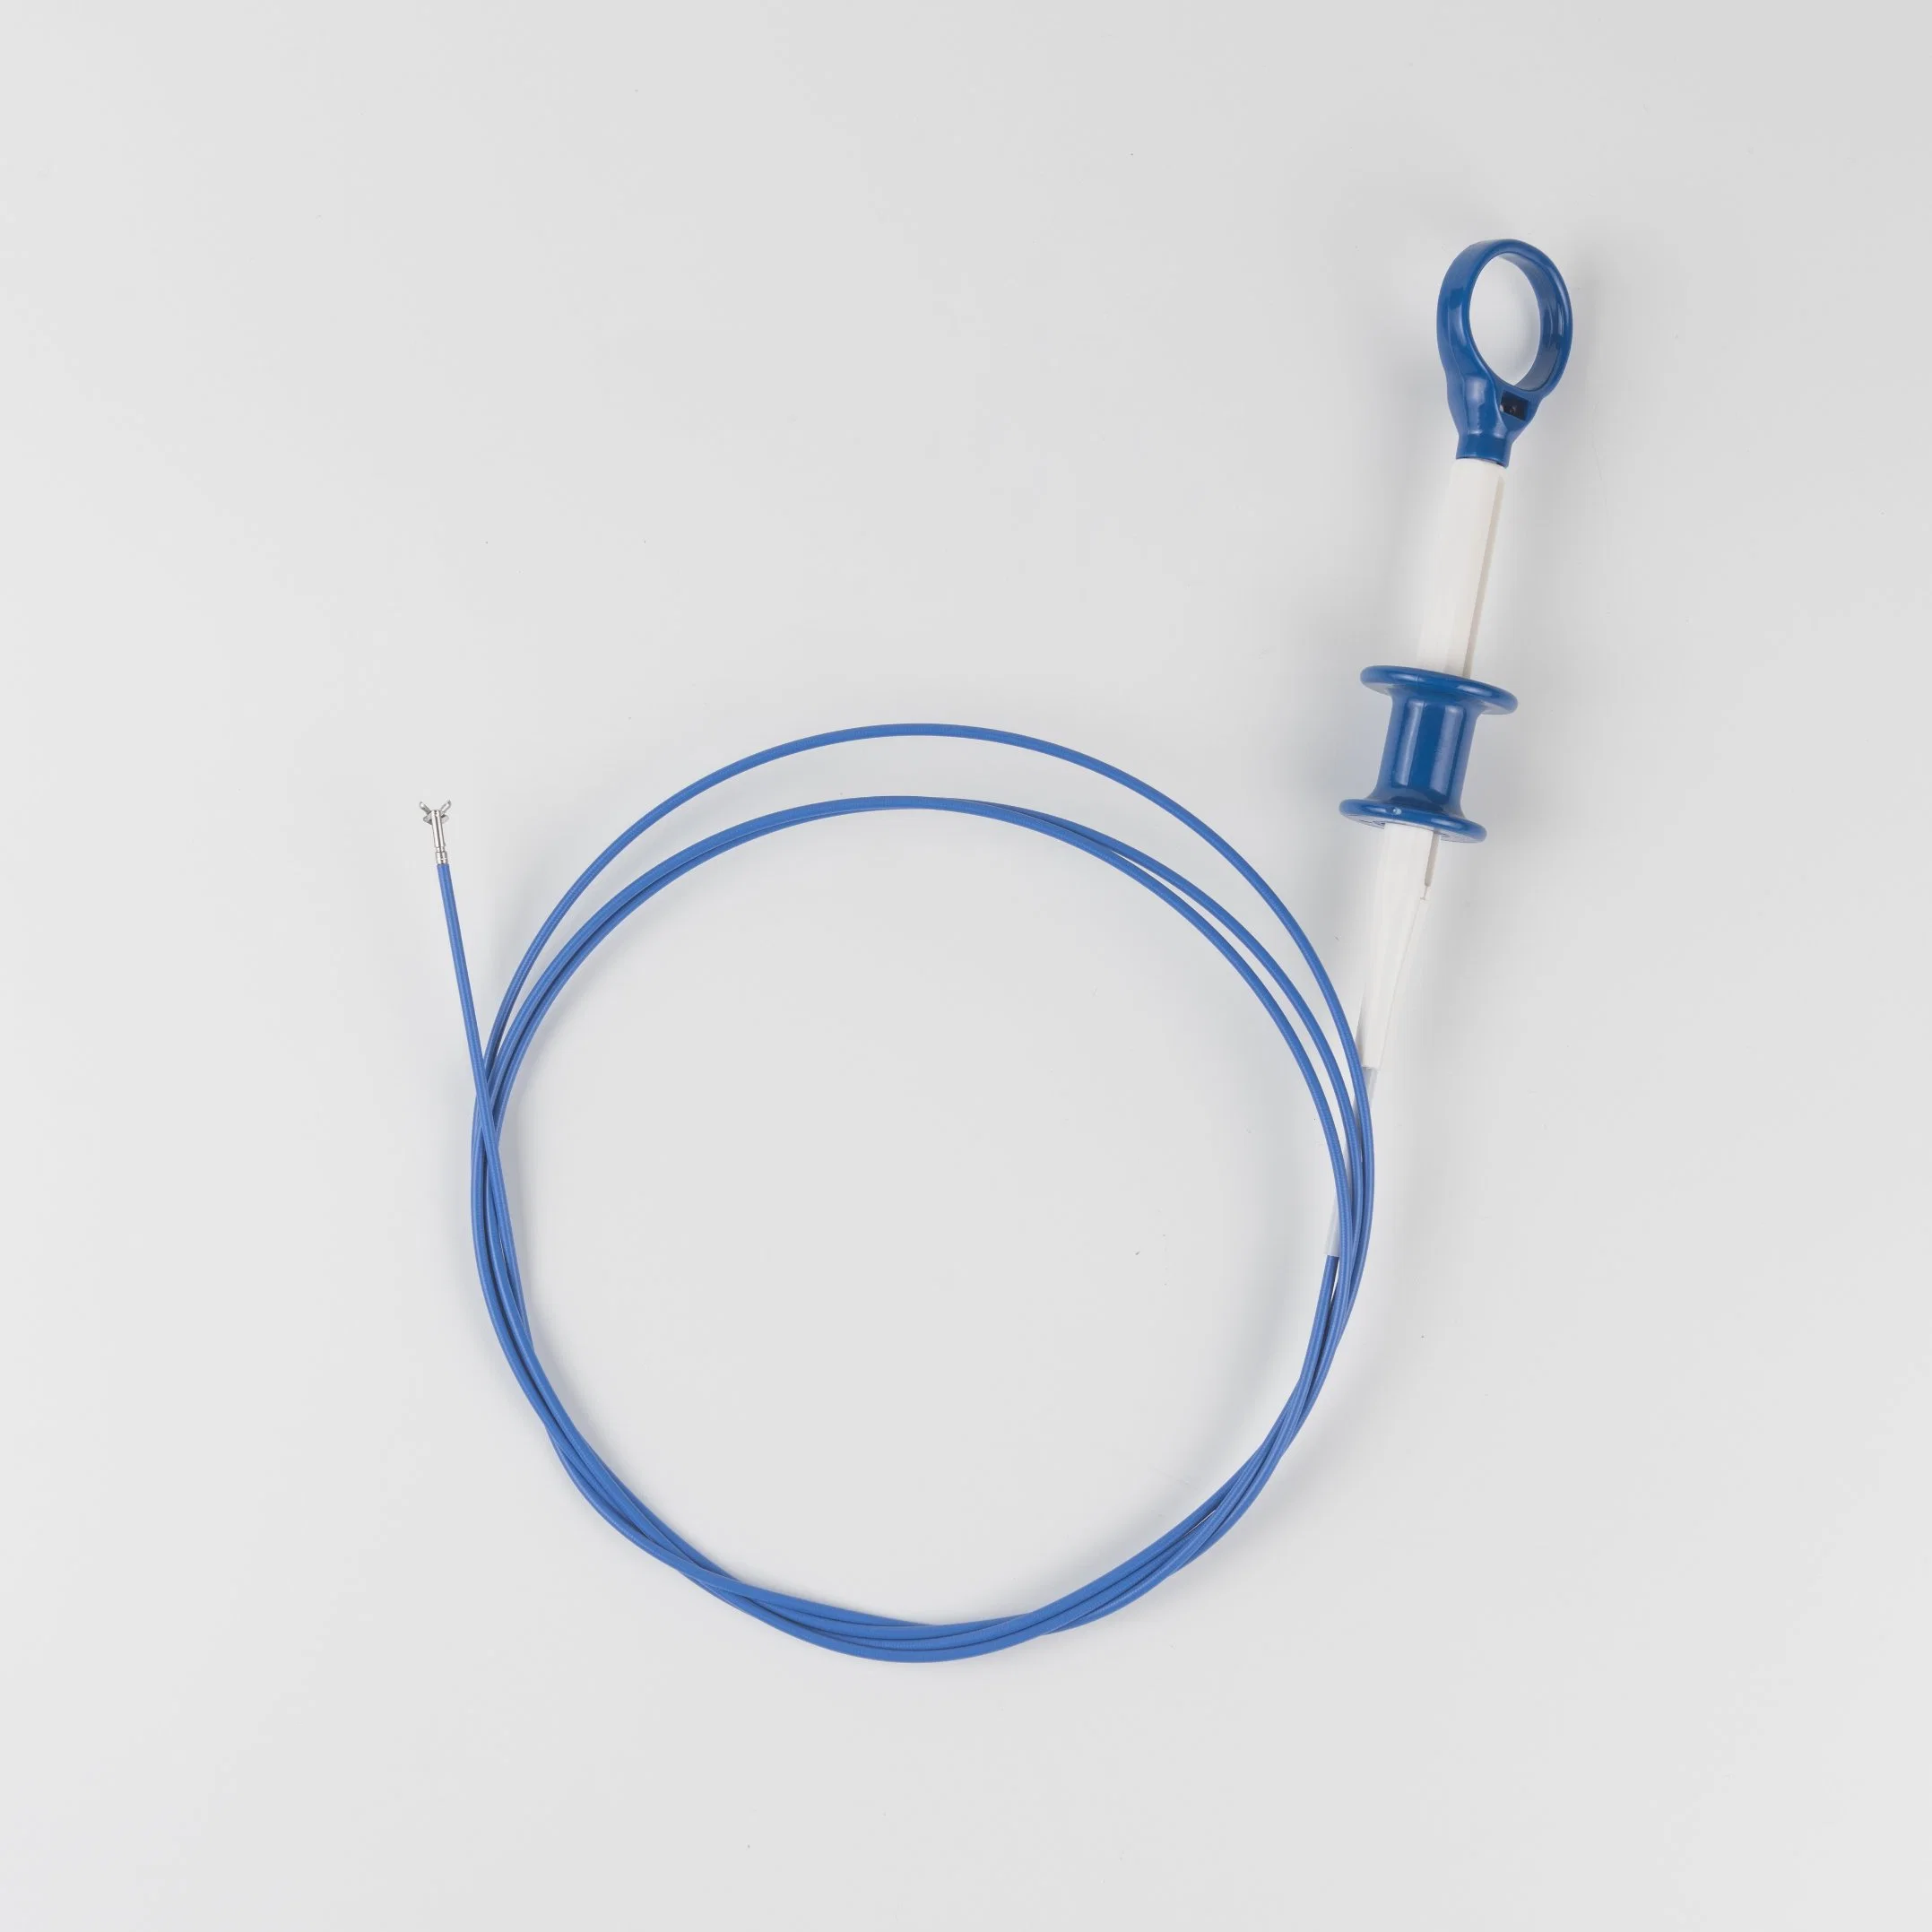 China-Made Medical Sterilized Disposable Biopsy Forceps for Colonoscopy Endoscopes